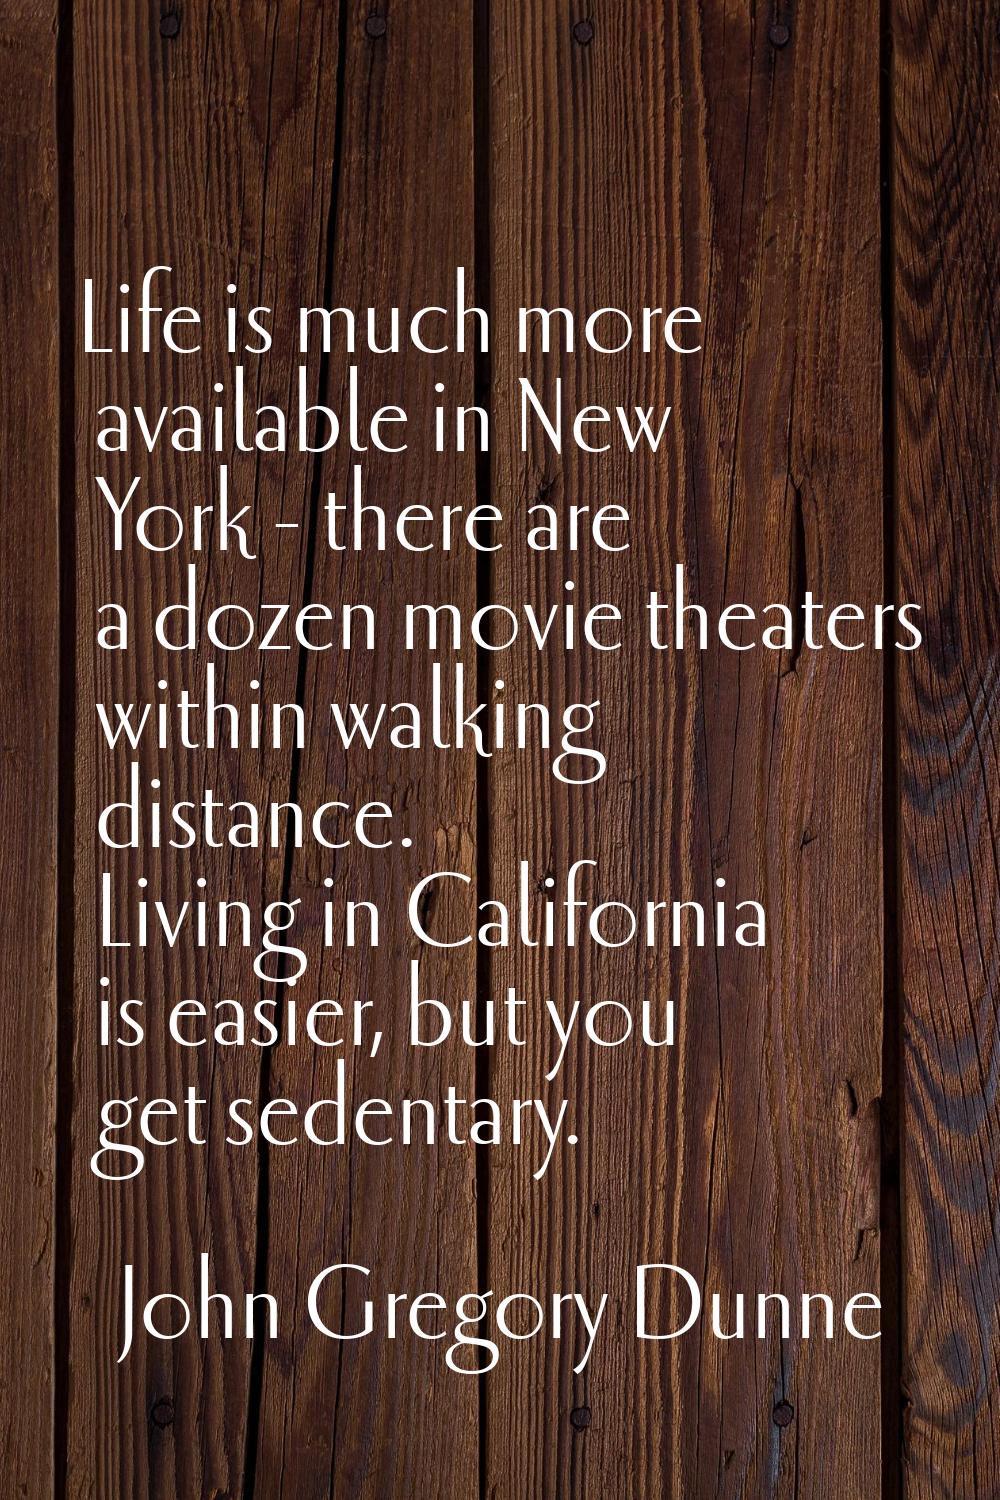 Life is much more available in New York - there are a dozen movie theaters within walking distance.